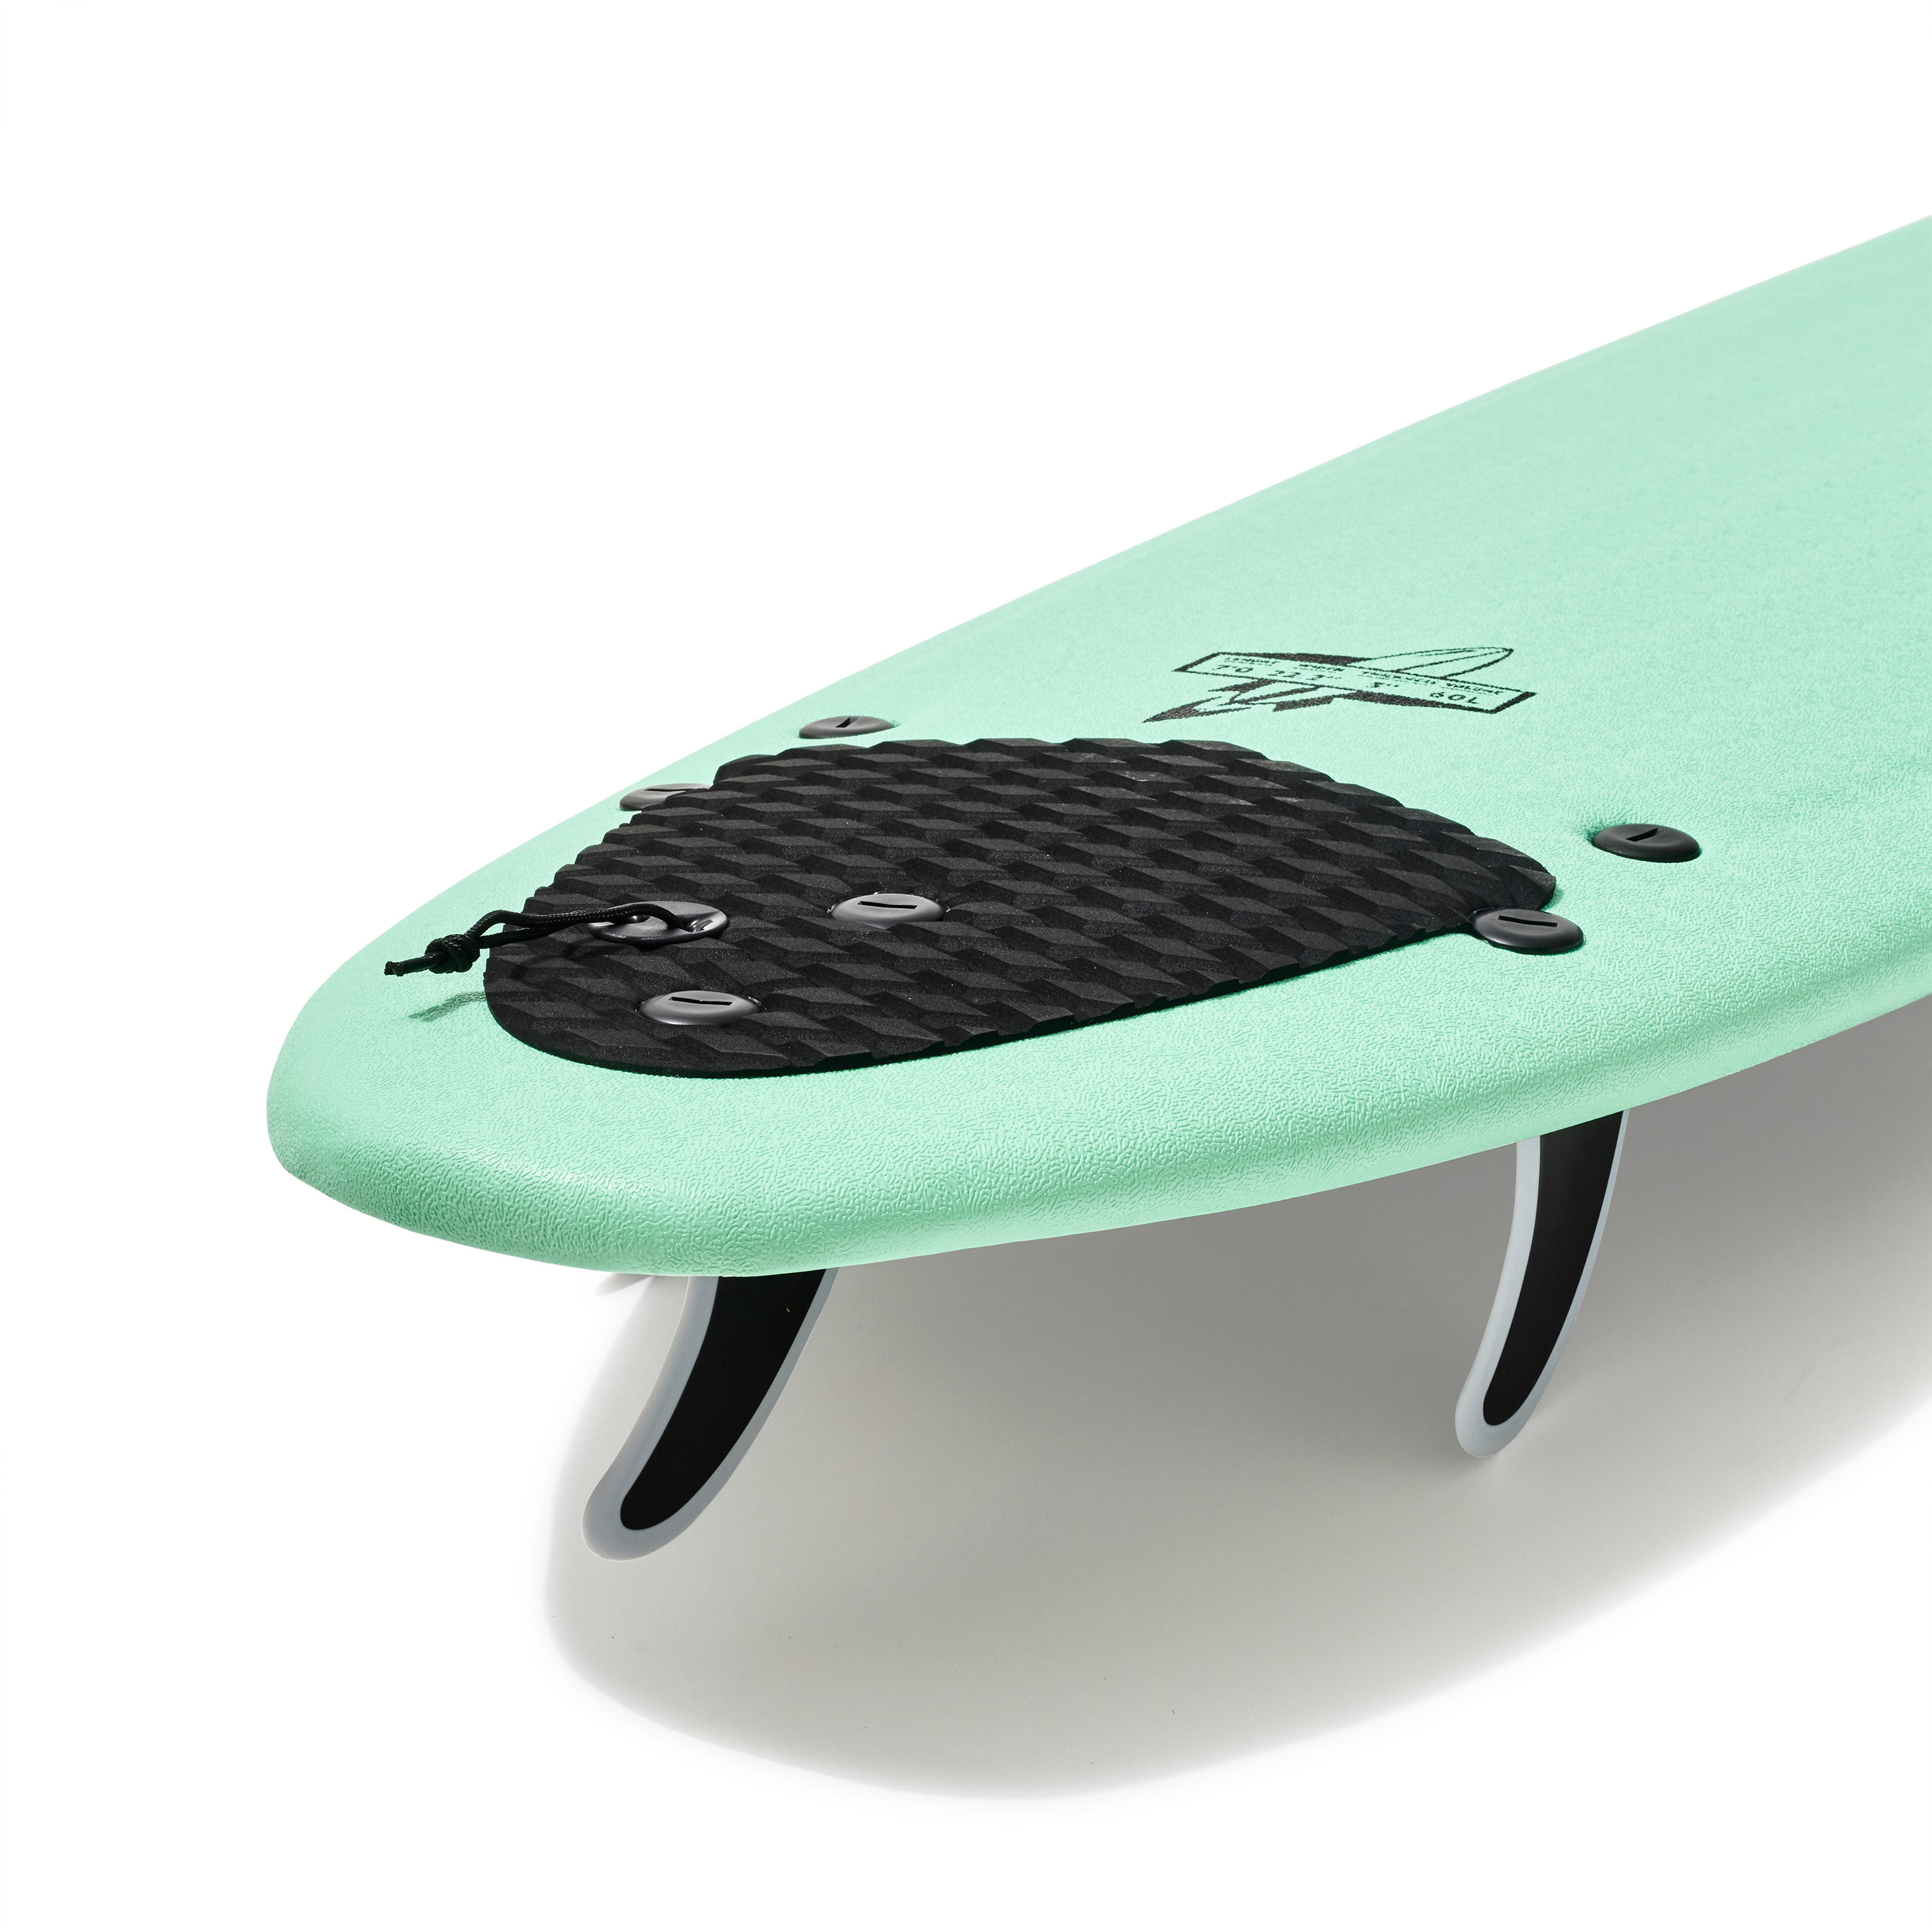 FOAM SURFBOARD 900 7’  . Comes with 3 fins. 5/12